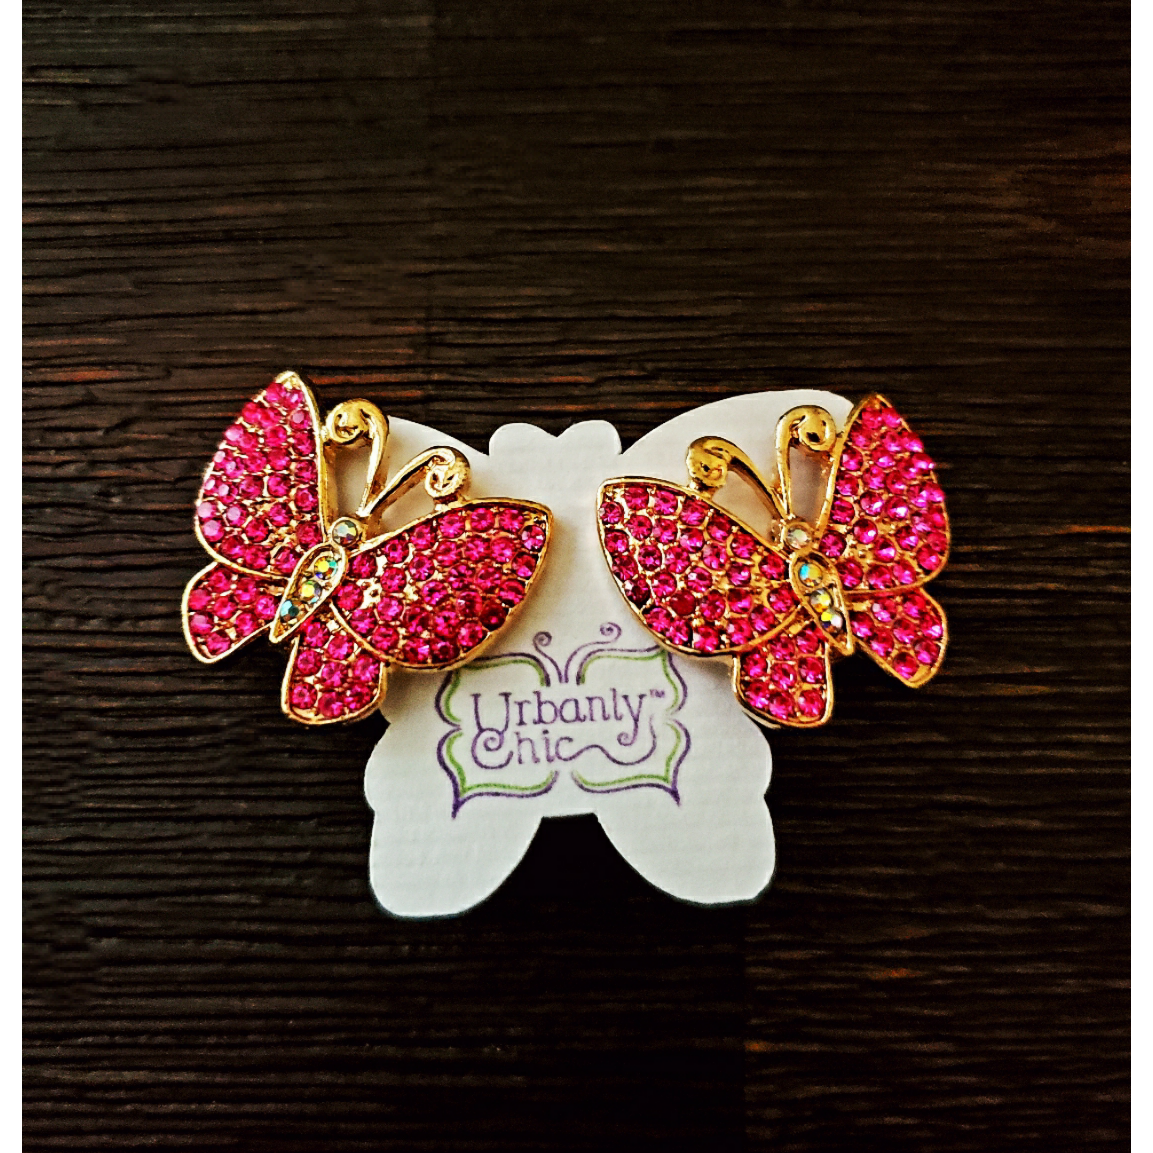 *Clip-On* Blinged Out Butterfly Earrings